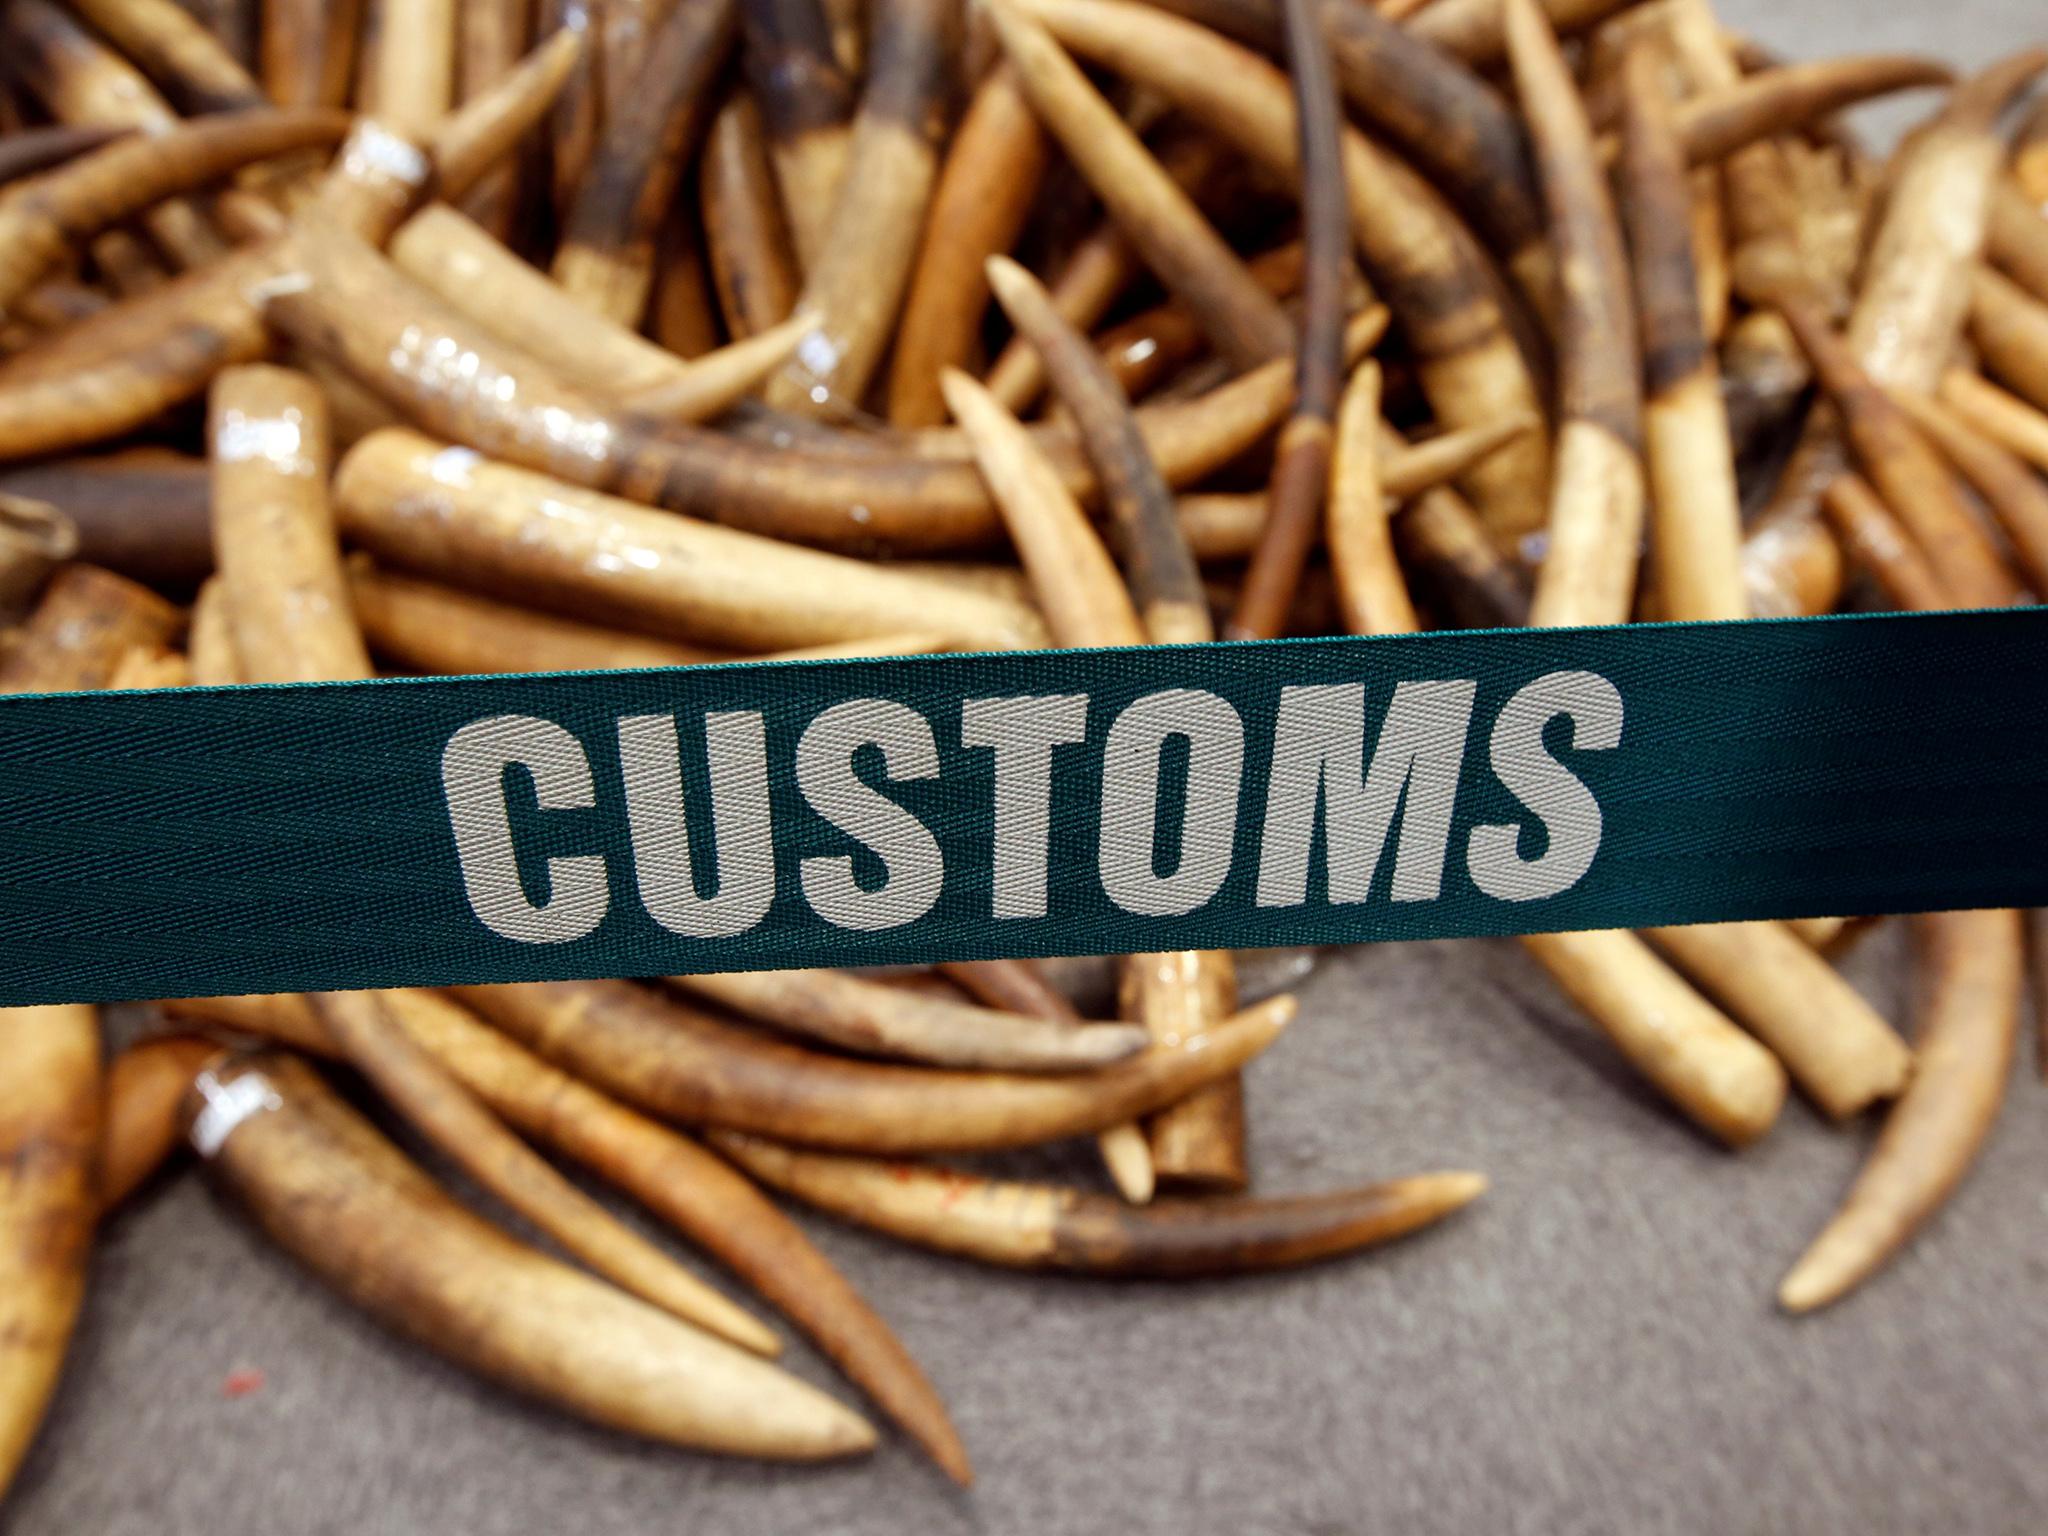 Ivory tusks seized by customs officials in Hong Kong